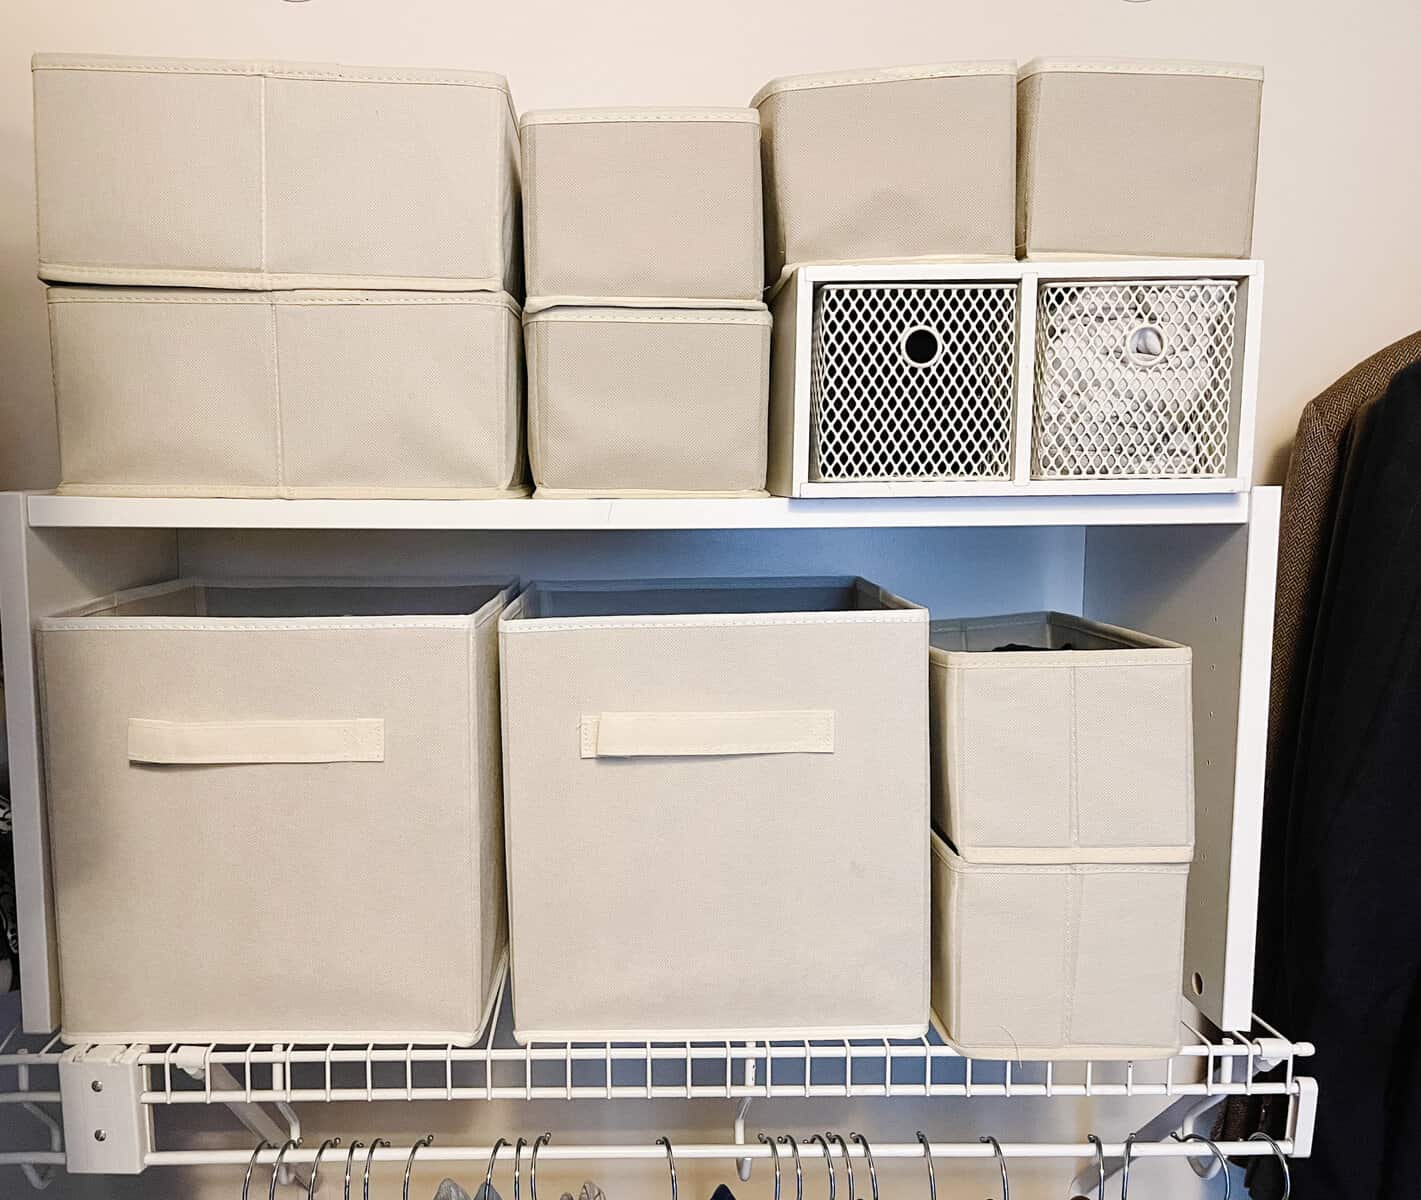 fabric boxes on wire shelf for organization in walk in closet